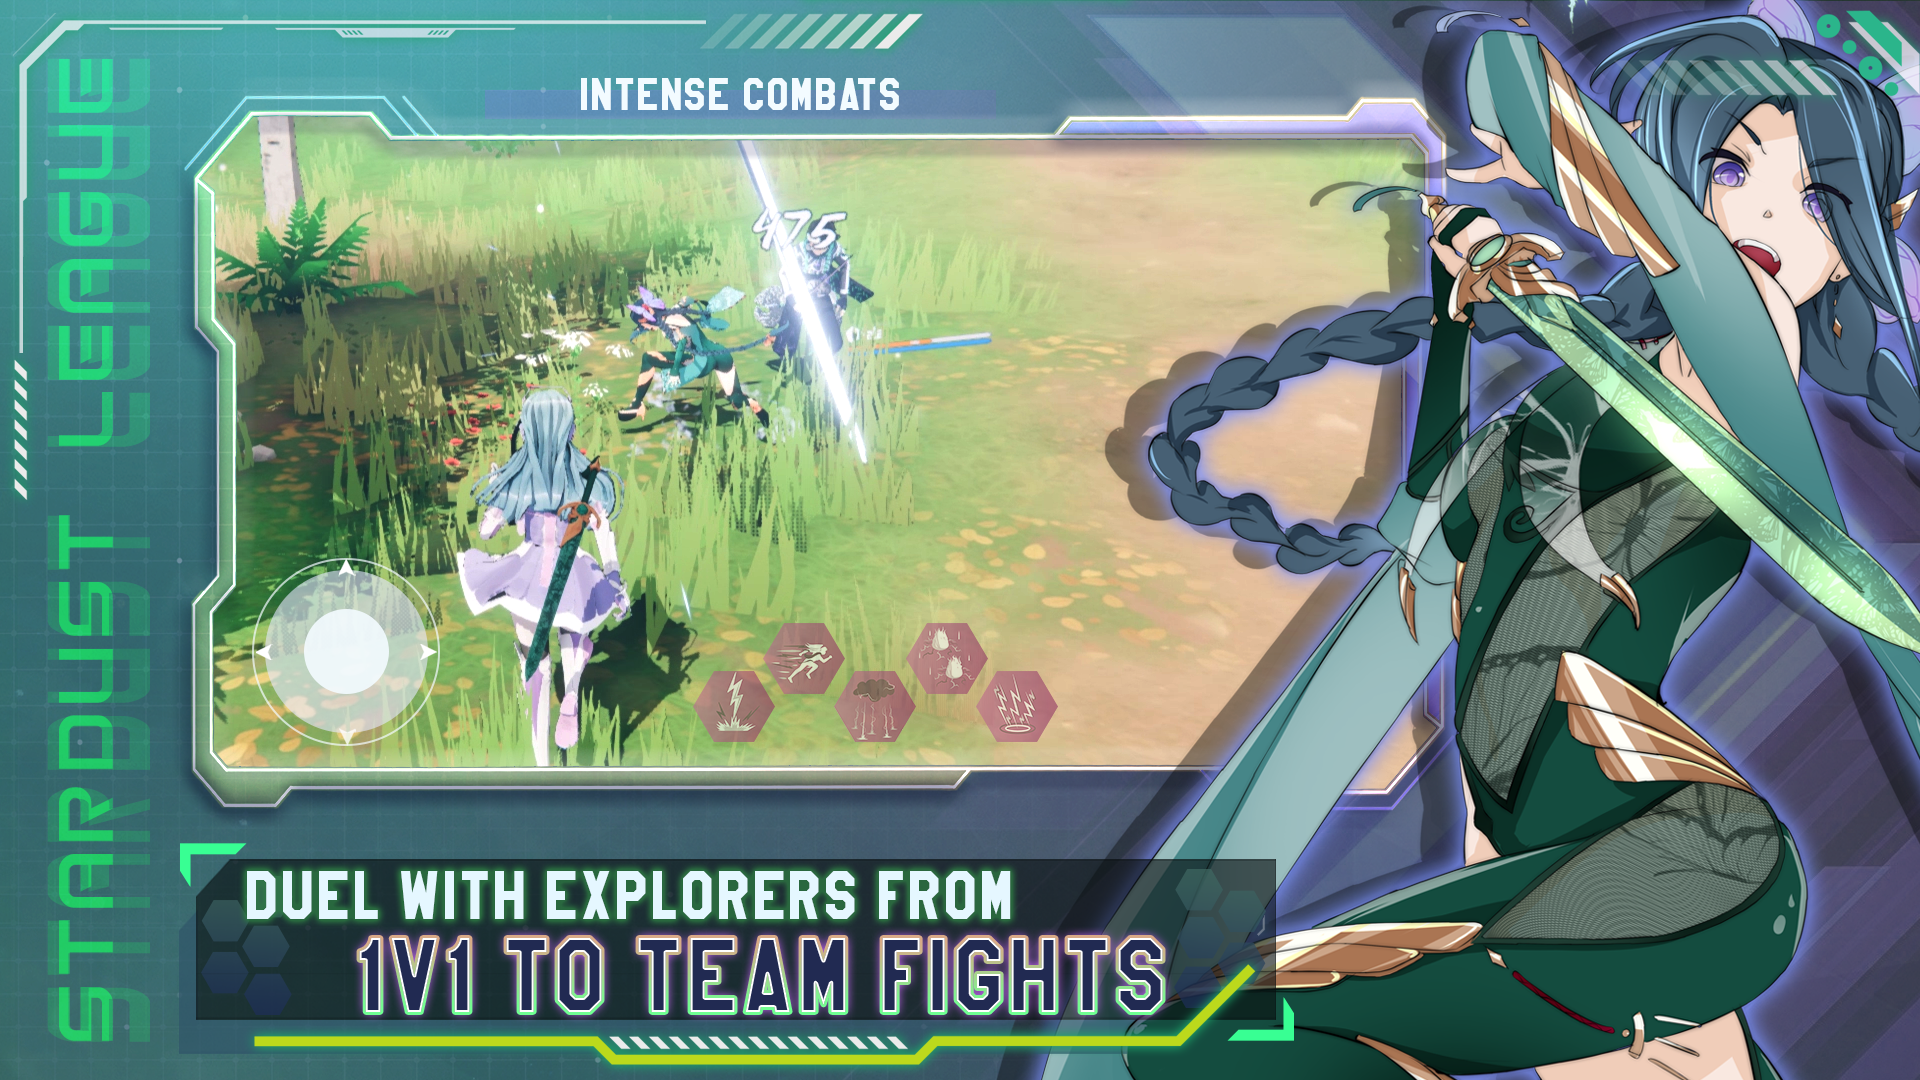 Stardust League is an upcoming PVP that enters pre-registration on Android